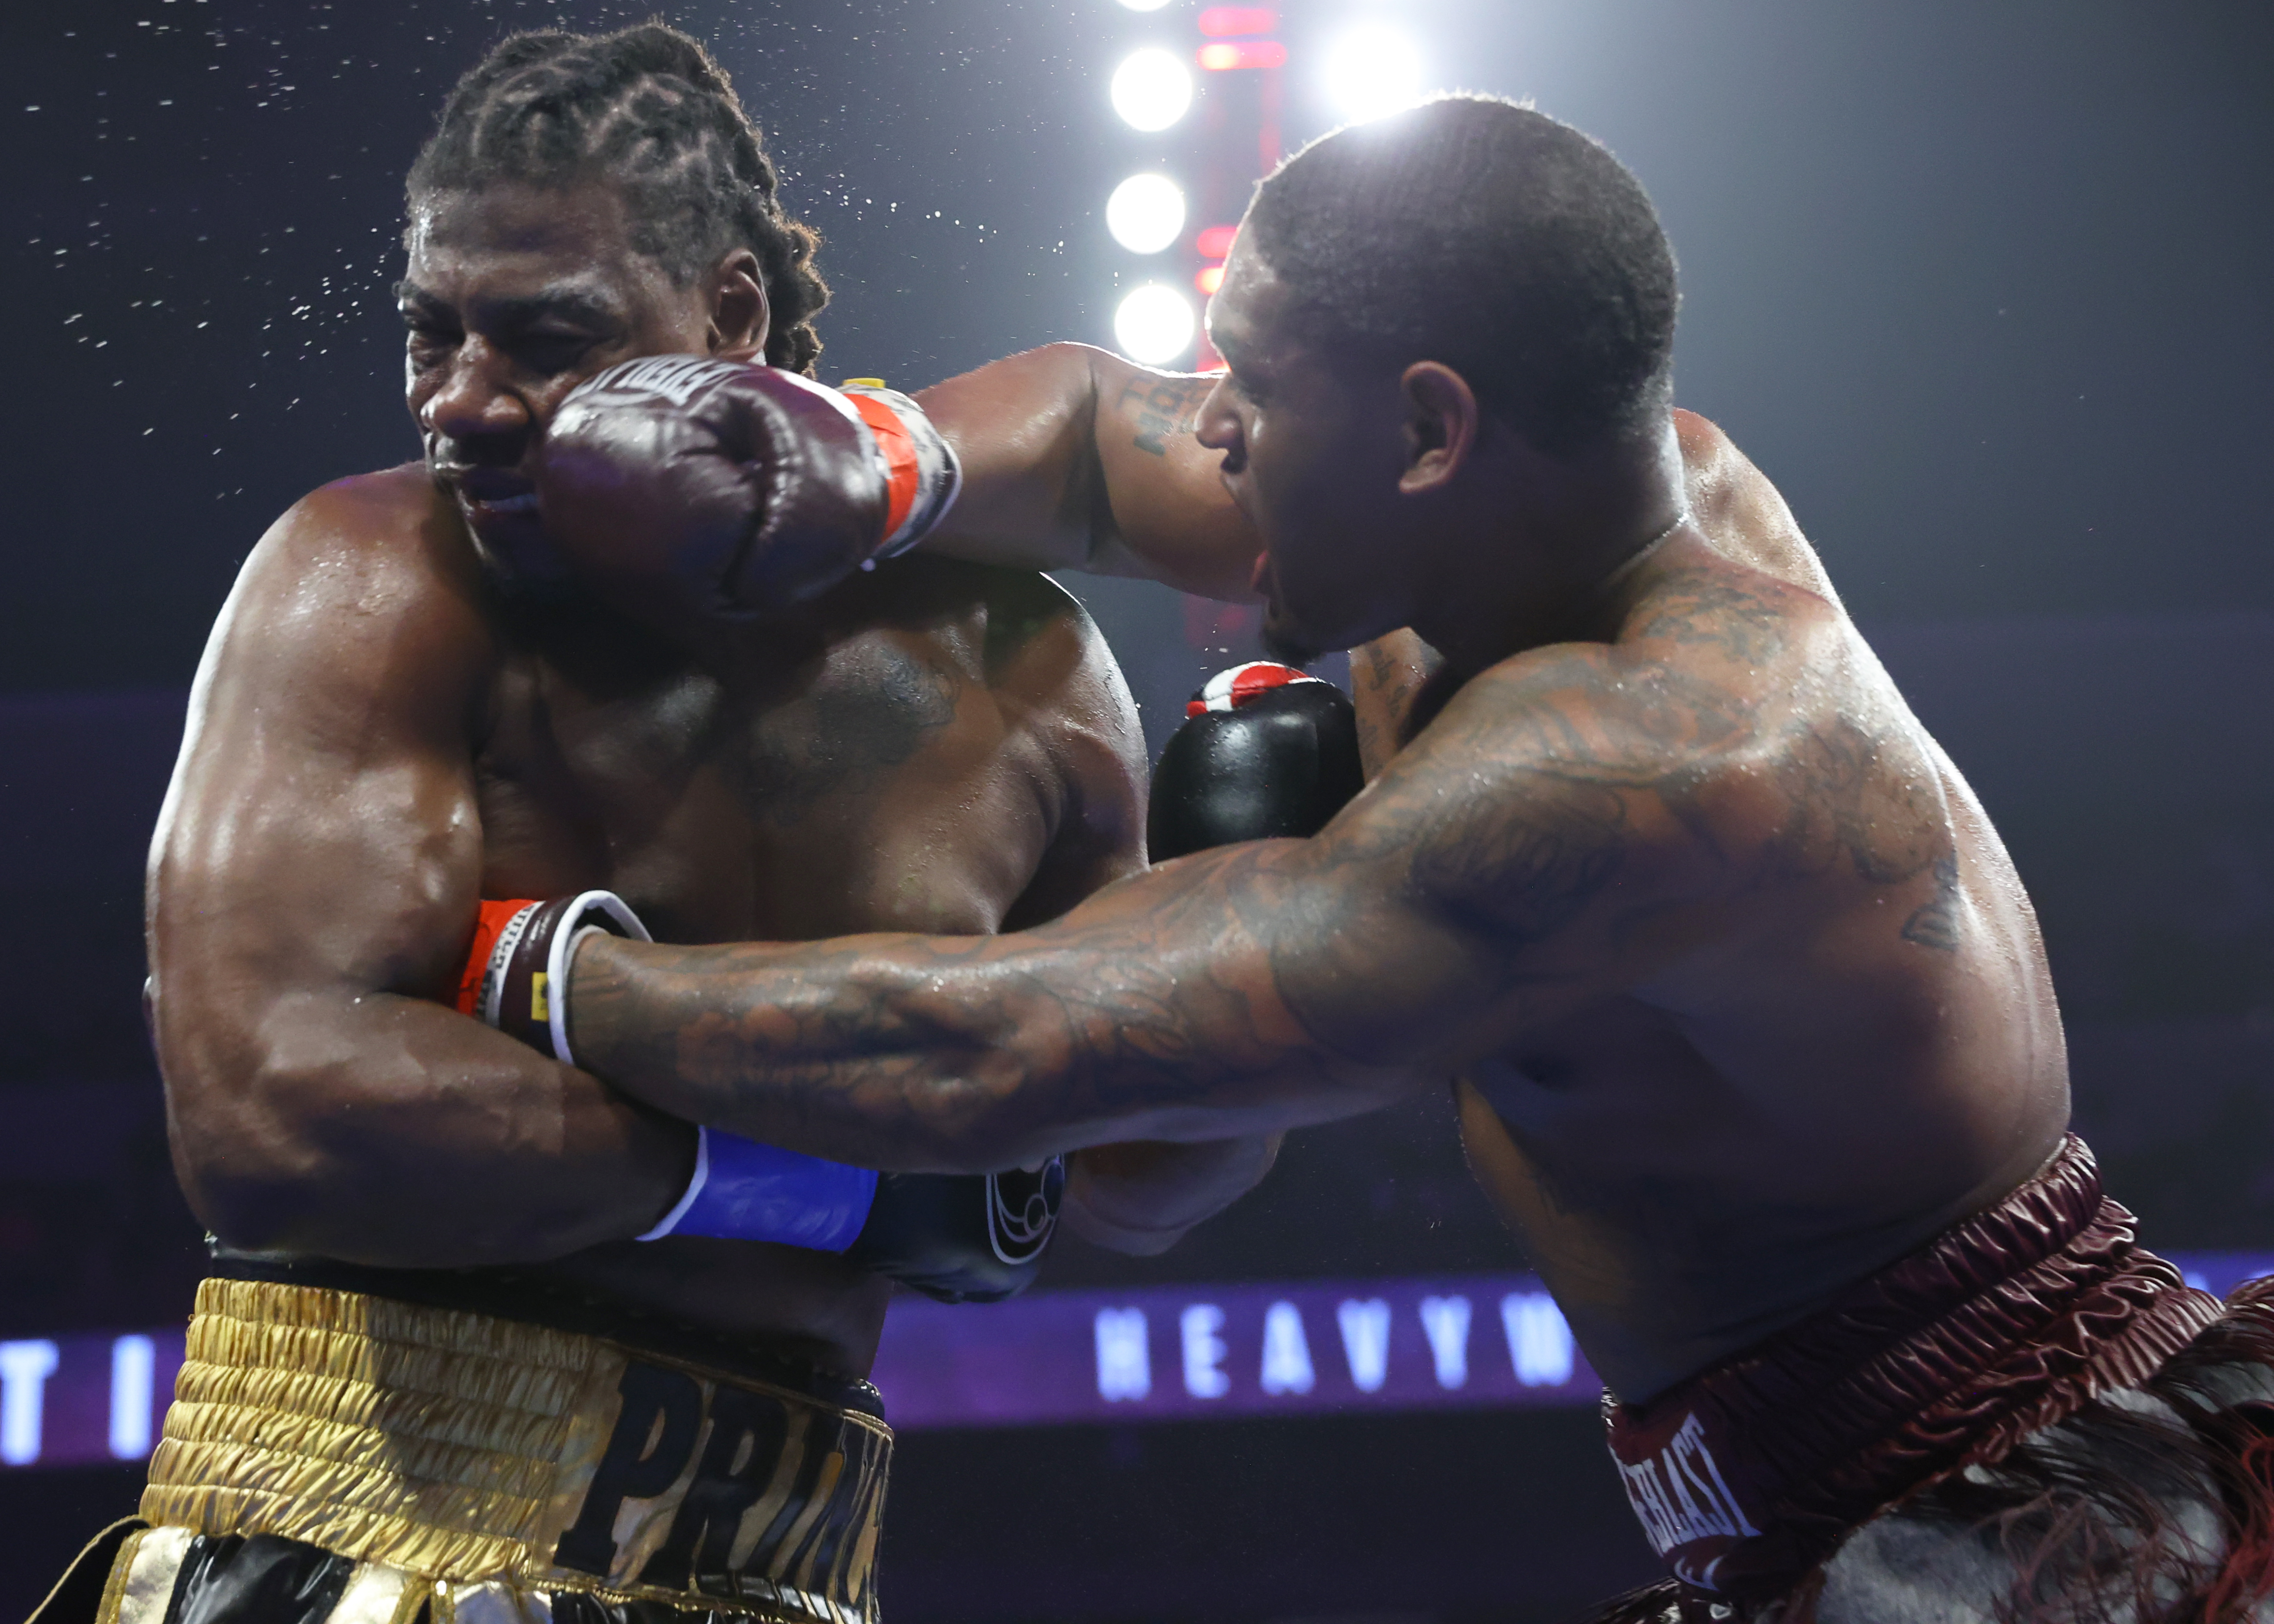 Jared Anderson showed some flaws, but got a good win over Charles Martin in Toledo